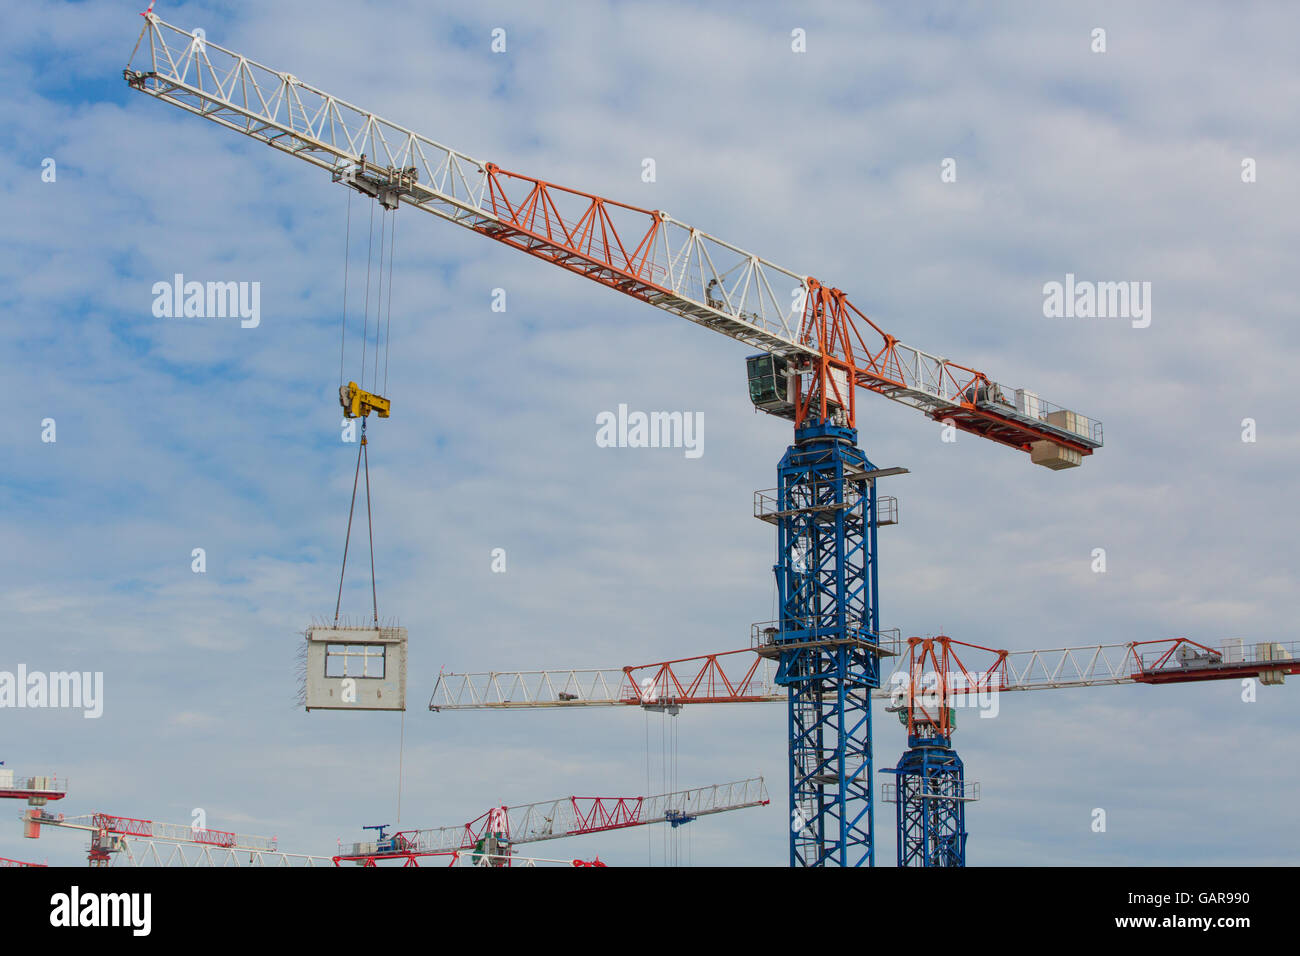 Tower cranes lifting and shifting the precast fabrication block hanging in the air from one spot to another. Singapore. Stock Photo